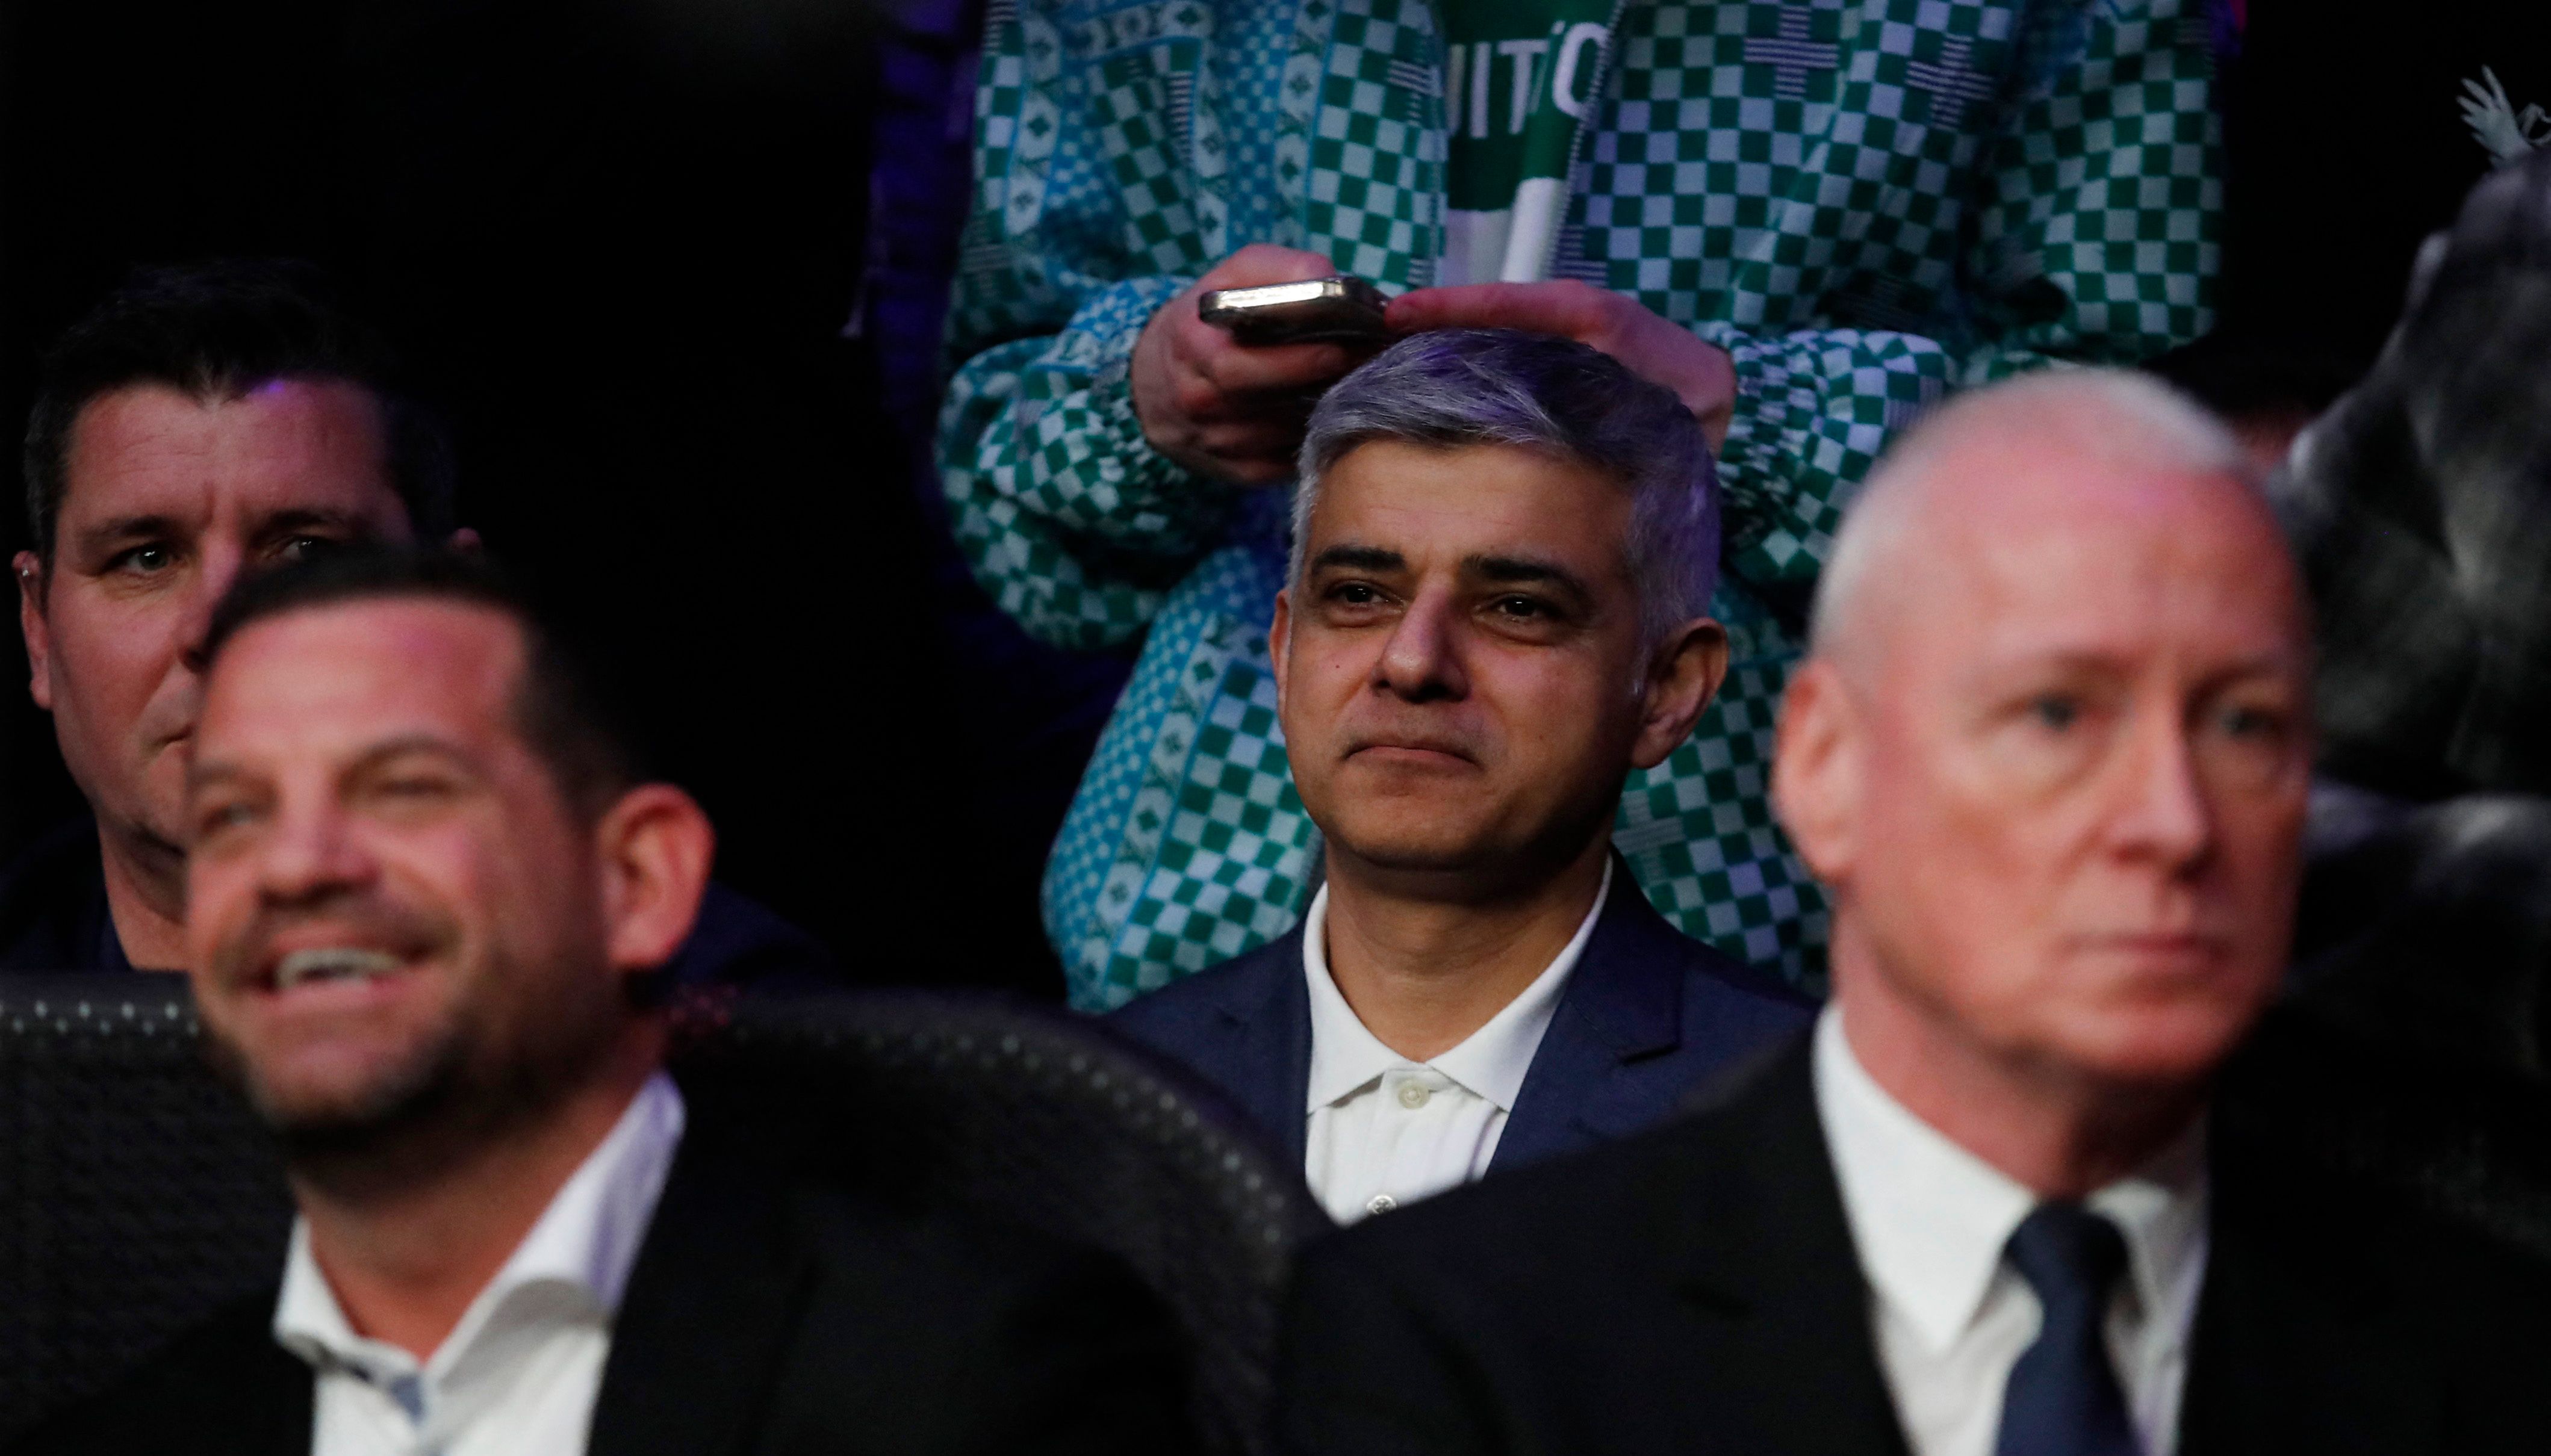 Boxing - Amir Khan v Kell Brook - AO Arena, Manchester, Britain - February 19, 2022  Mayor of London Sadiq Khan is seen in the crowd Action Images via Reuters/Andrew Couldridge